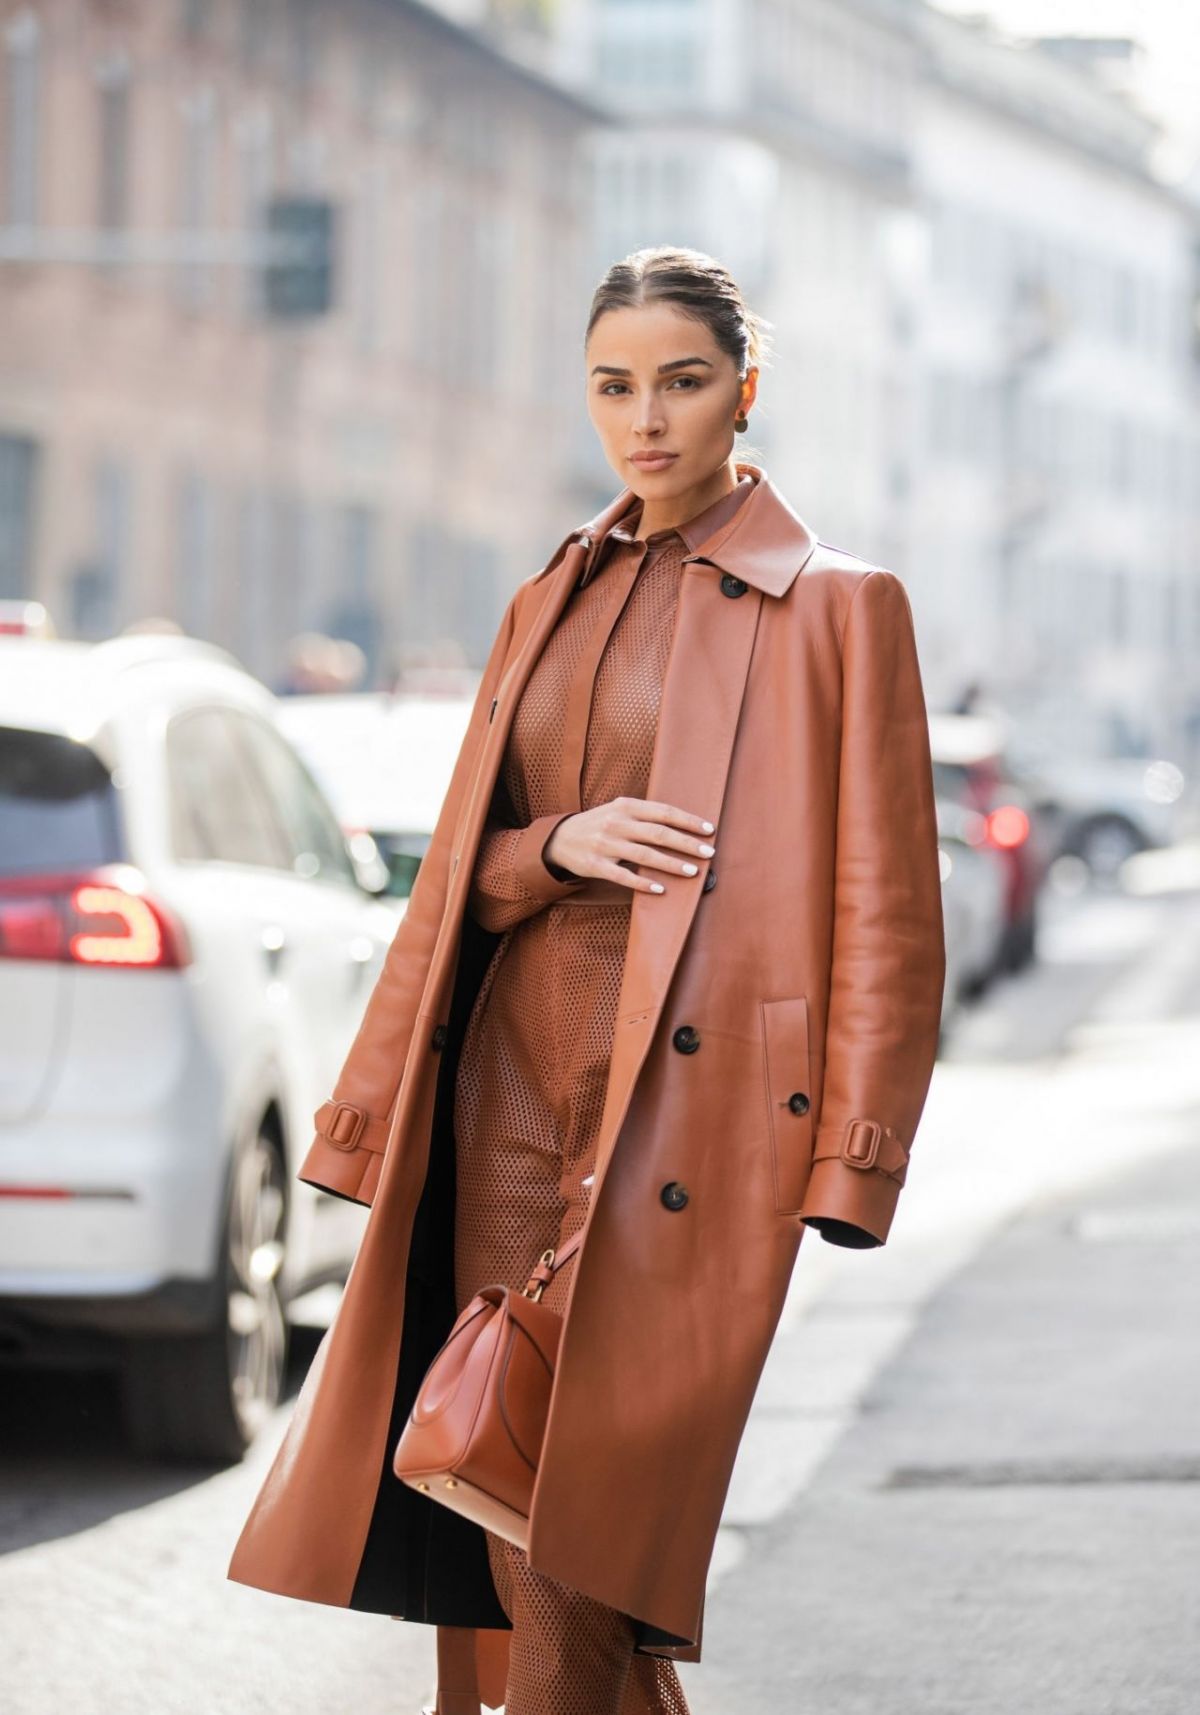 OLIVIA CULPO Out in Milan 02/21/2020 – HawtCelebs